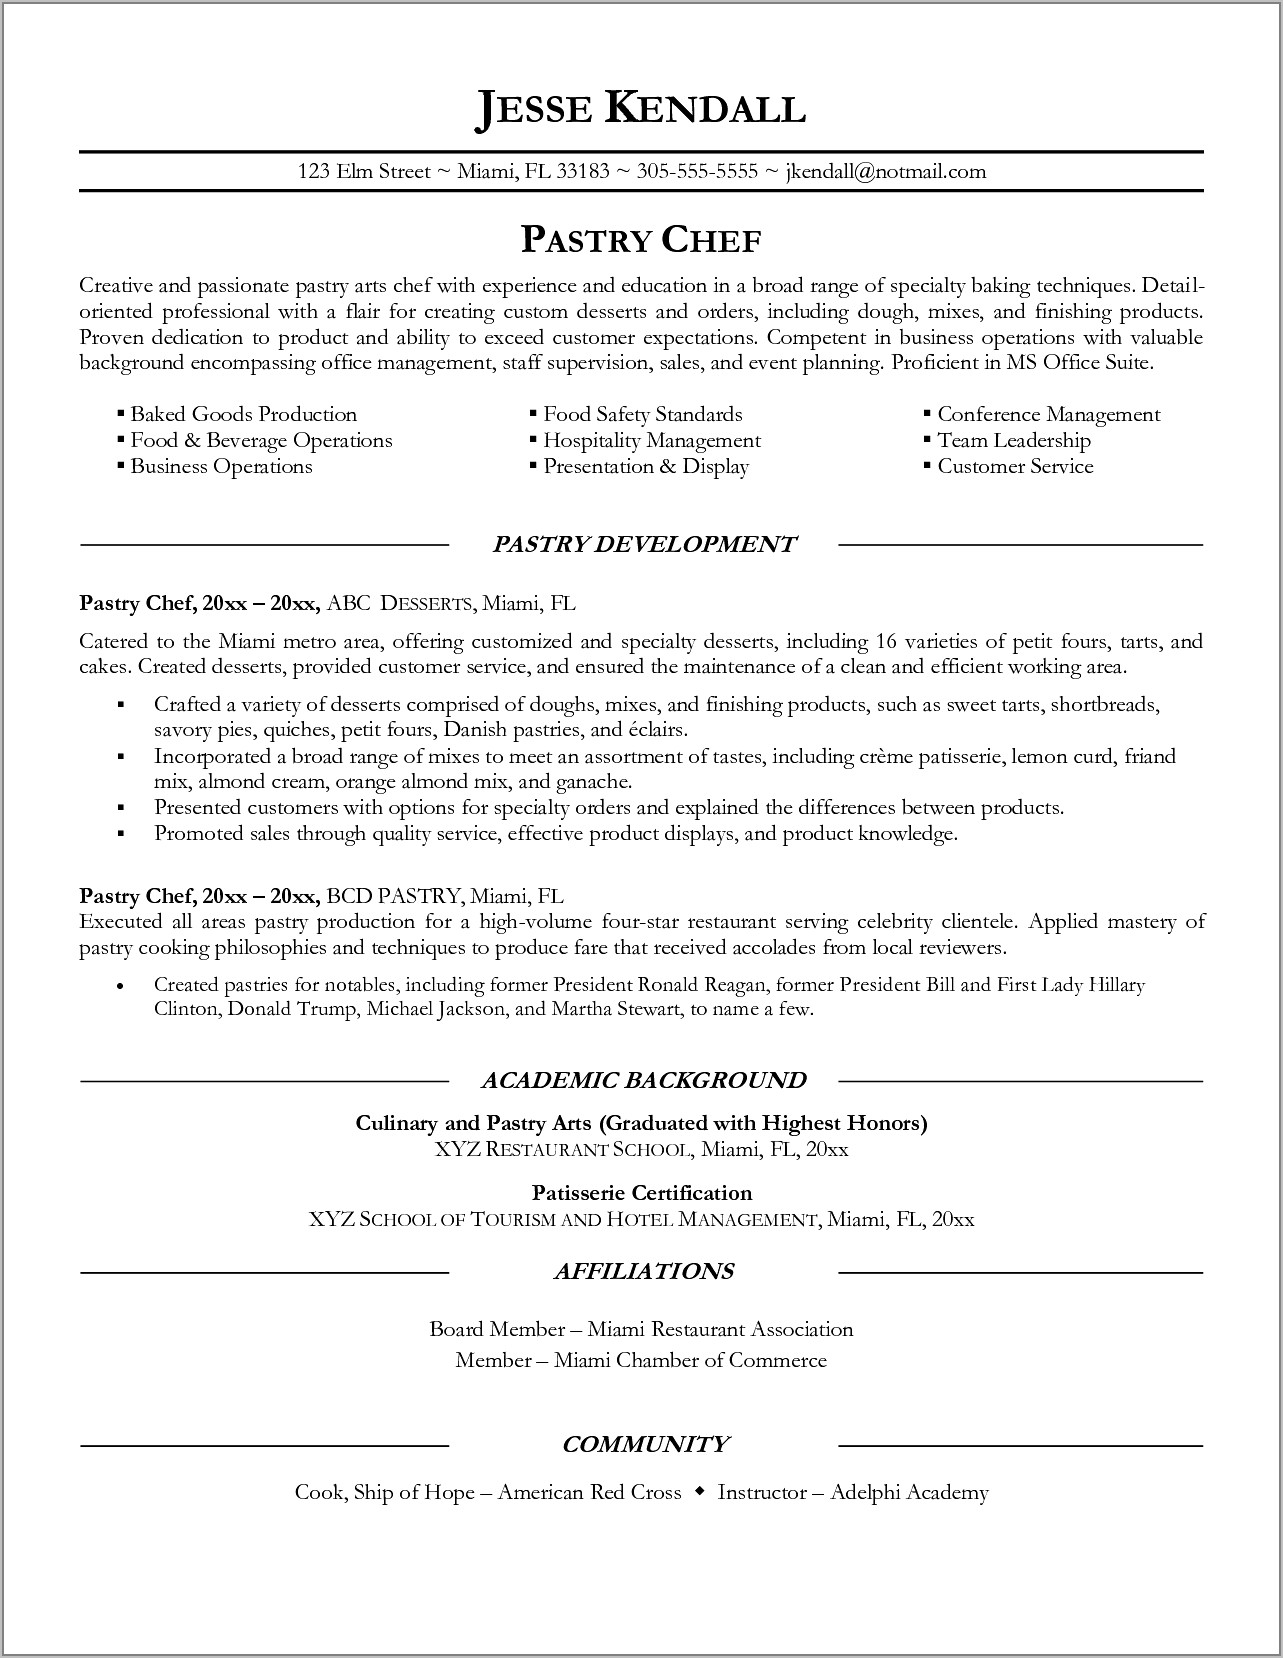 Resume Templates For Pastry Chefs